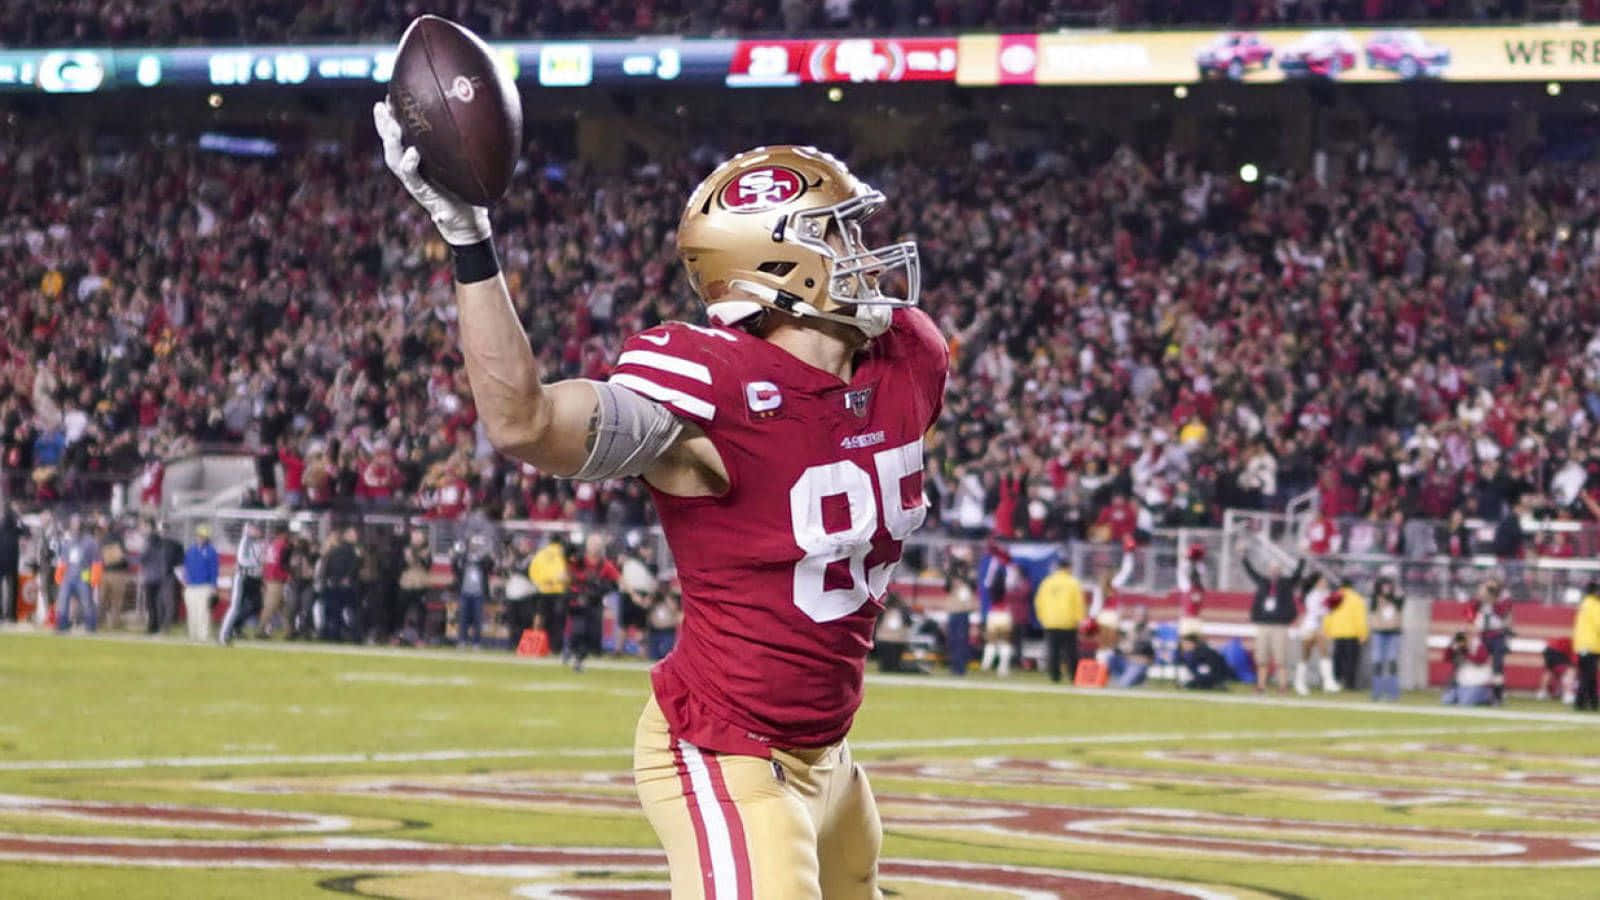 Sanfrancisco 49ers Tight End George Kittle - George Kittle, Tight End Dei San Francisco 49ers. Sfondo